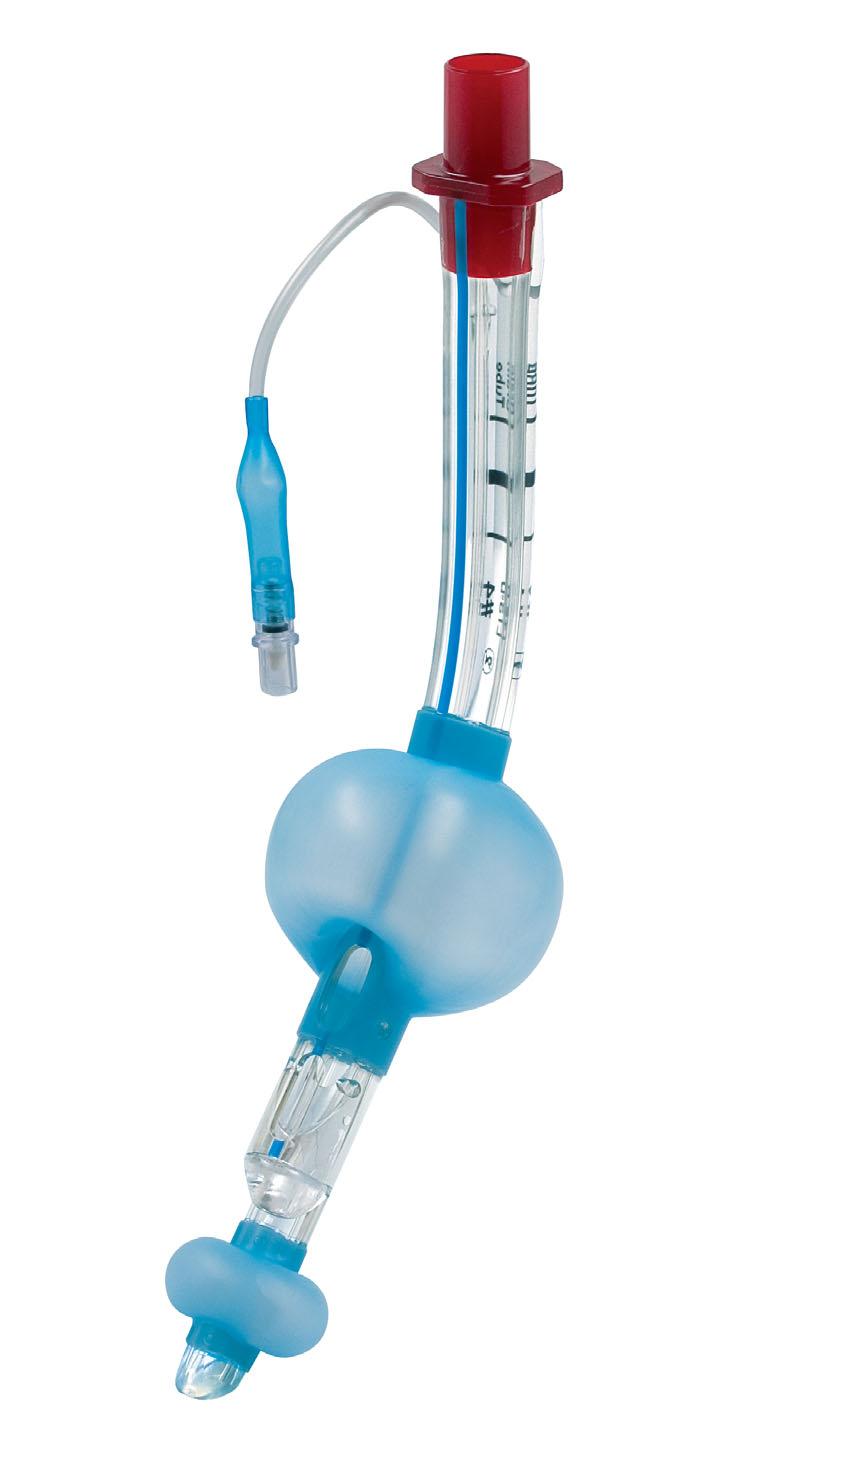 Laryngeal Tubes The Laryngeal Tube is a supraglottic airway device for the use in general anesthesia during spontaneous or positive pressure ventilation.